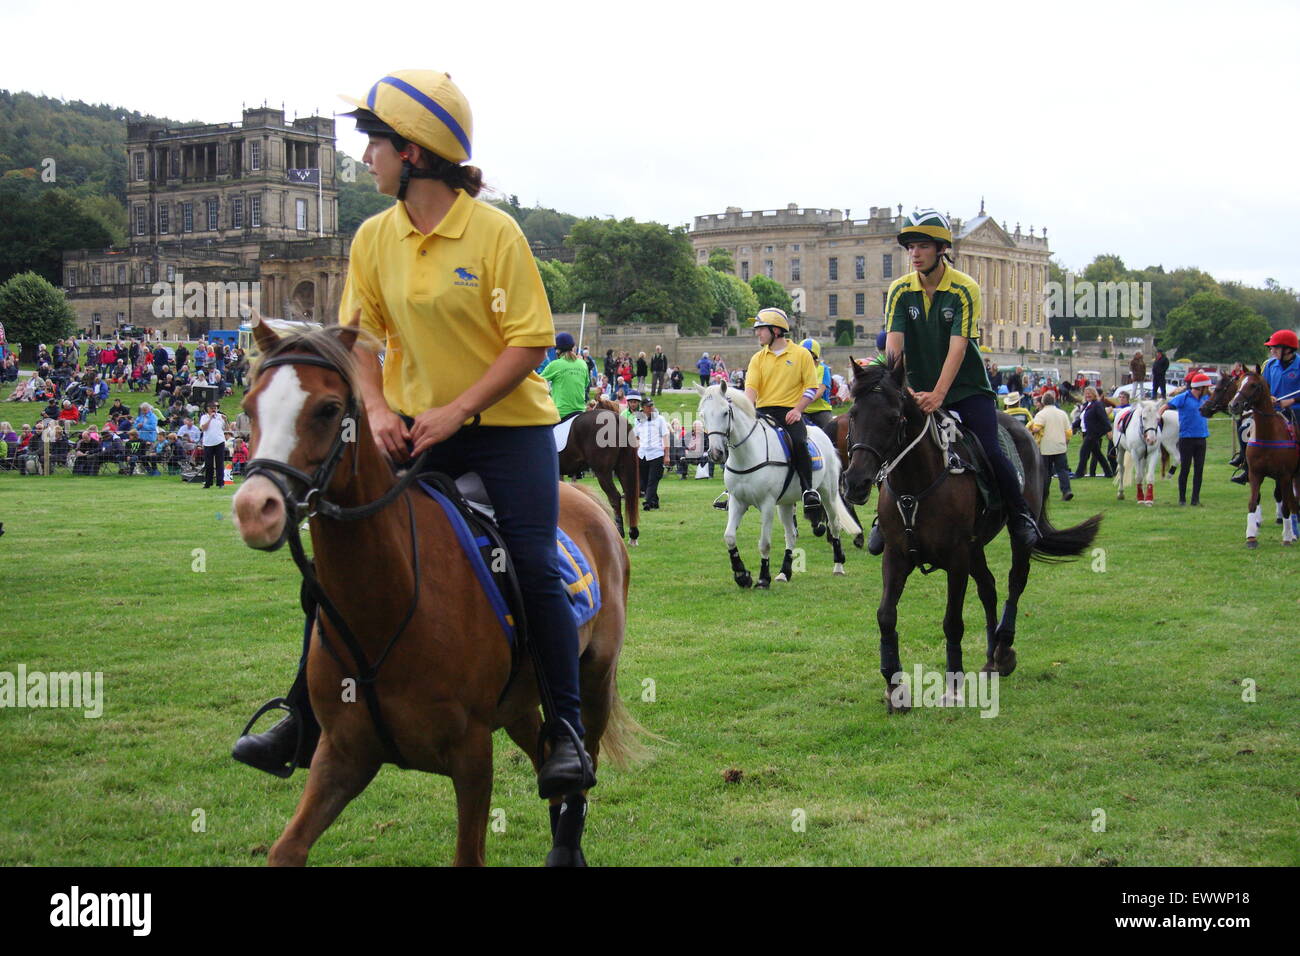 Pony clubs participate in Mounted Games at Chatsworth Country Fair Derbyshire England UK Stock Photo